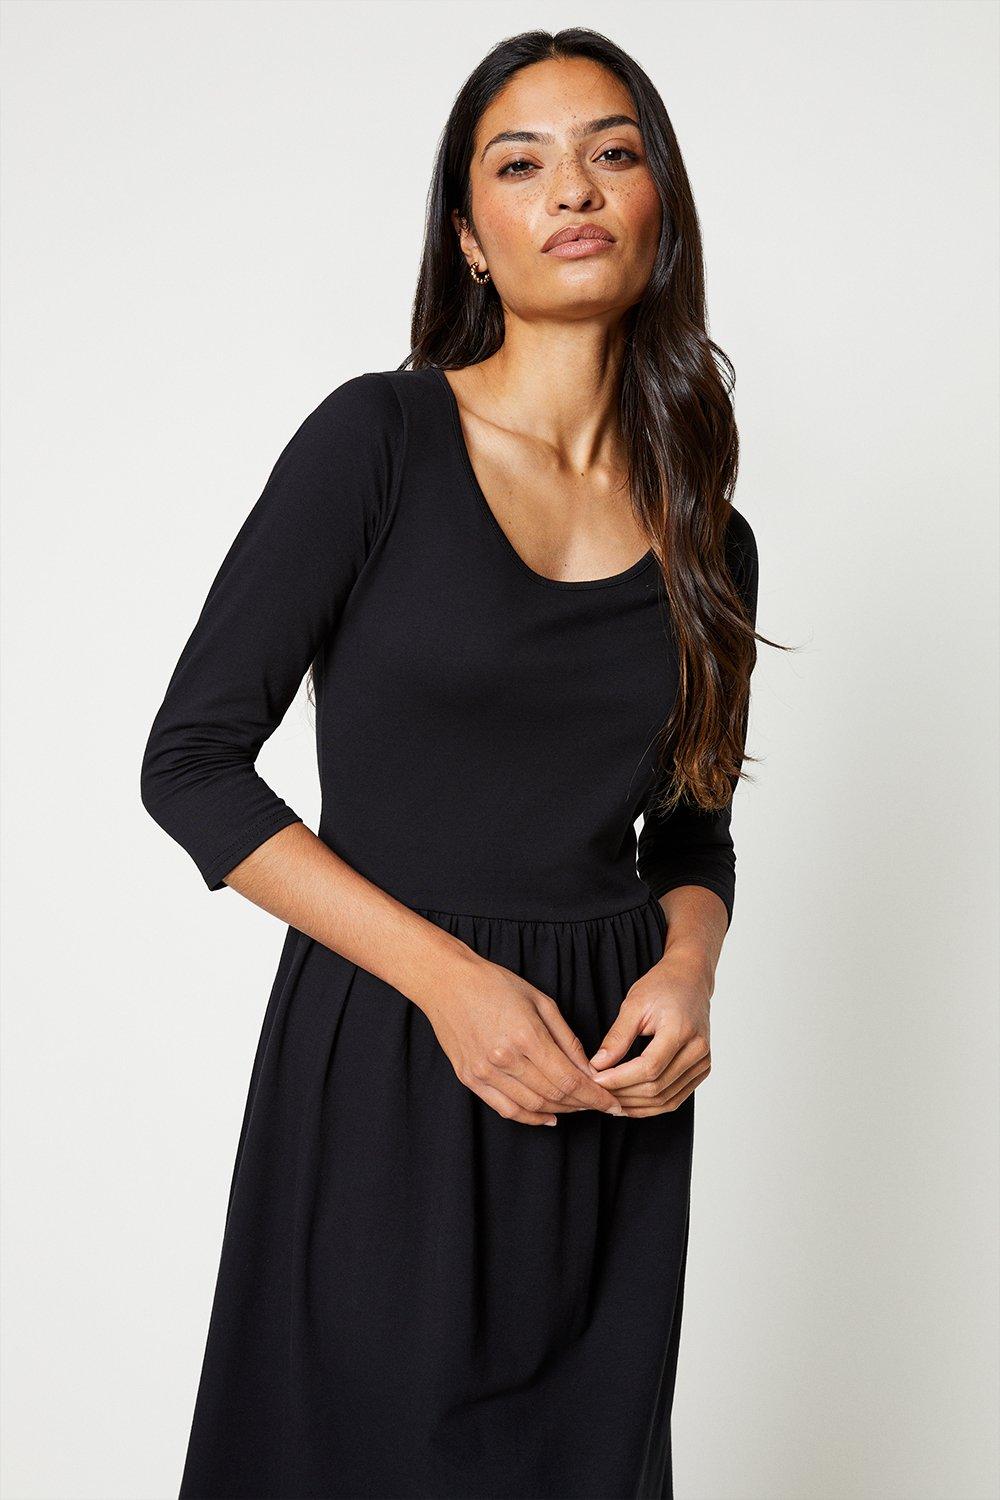 The Pioneer Woman Scoop Neck Dress with Short Sleeves, Women's